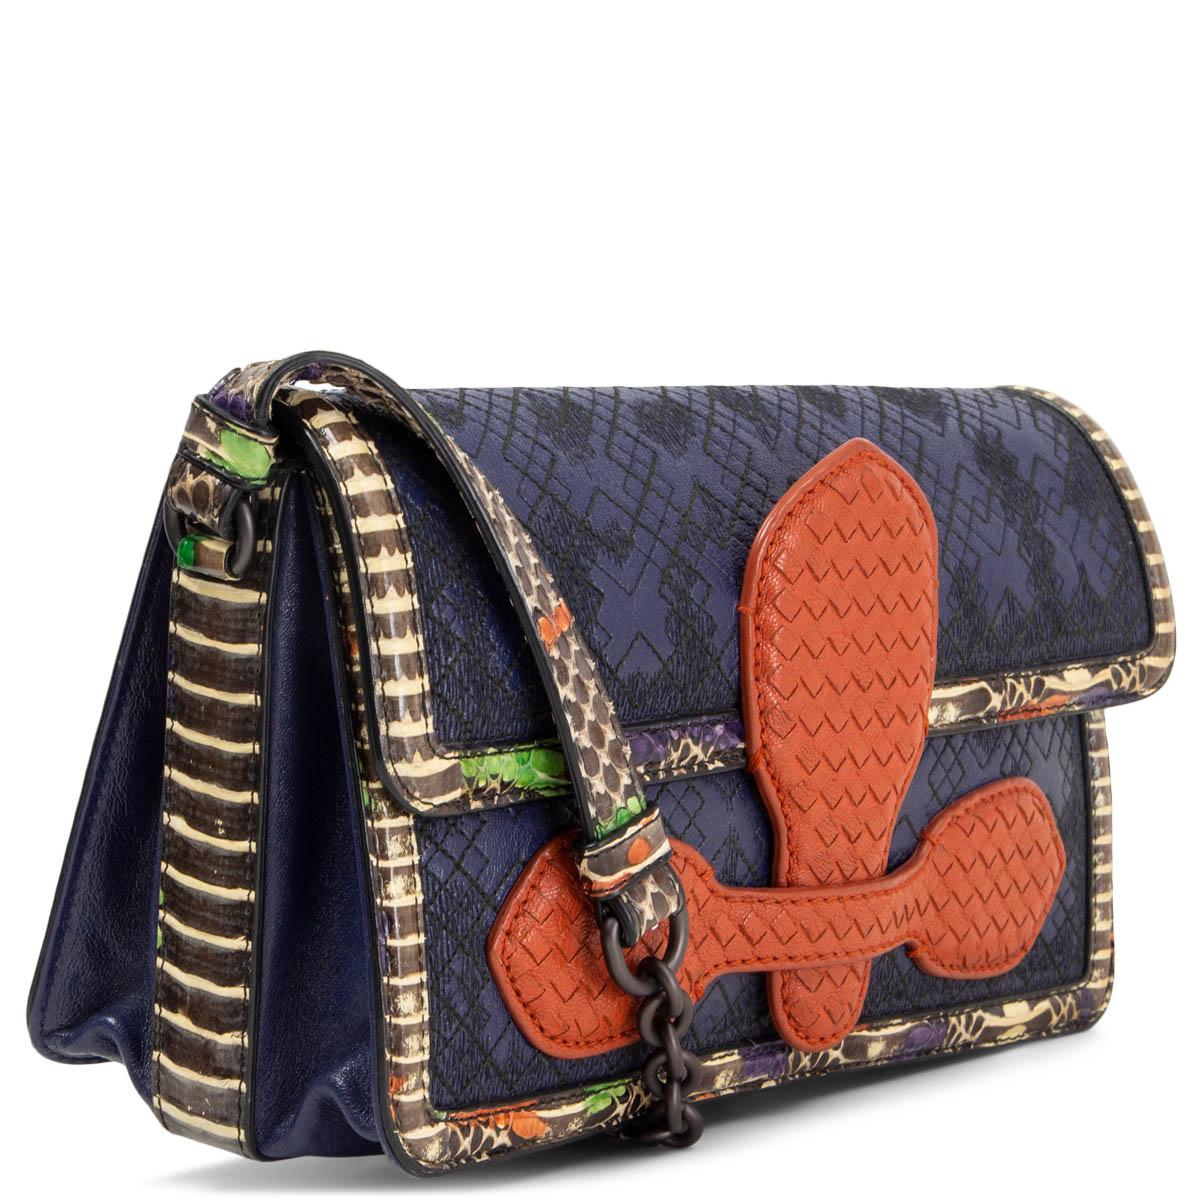 100% authentic Bottega Veneta shoulder bag in navy blue and burnt sienna calfskin with handpainted cream, grey, purple, green and brown snakeskin trimming. Madras Heritage Microintrecciato and embroidered Capra Liquid leather. Opens with a magnetic